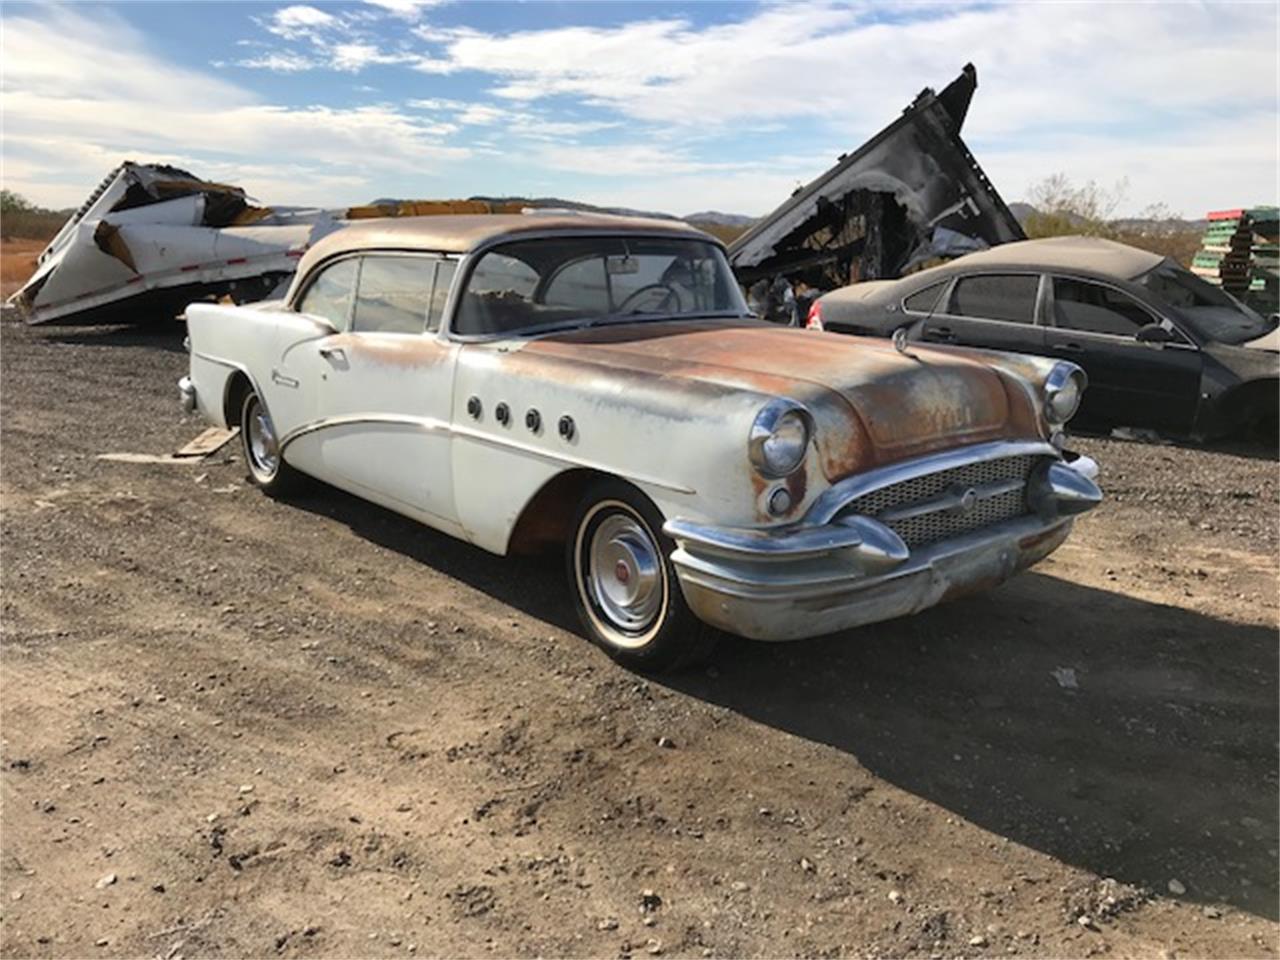 1955 buick century for sale classiccars com cc 1052998 1955 buick century for sale